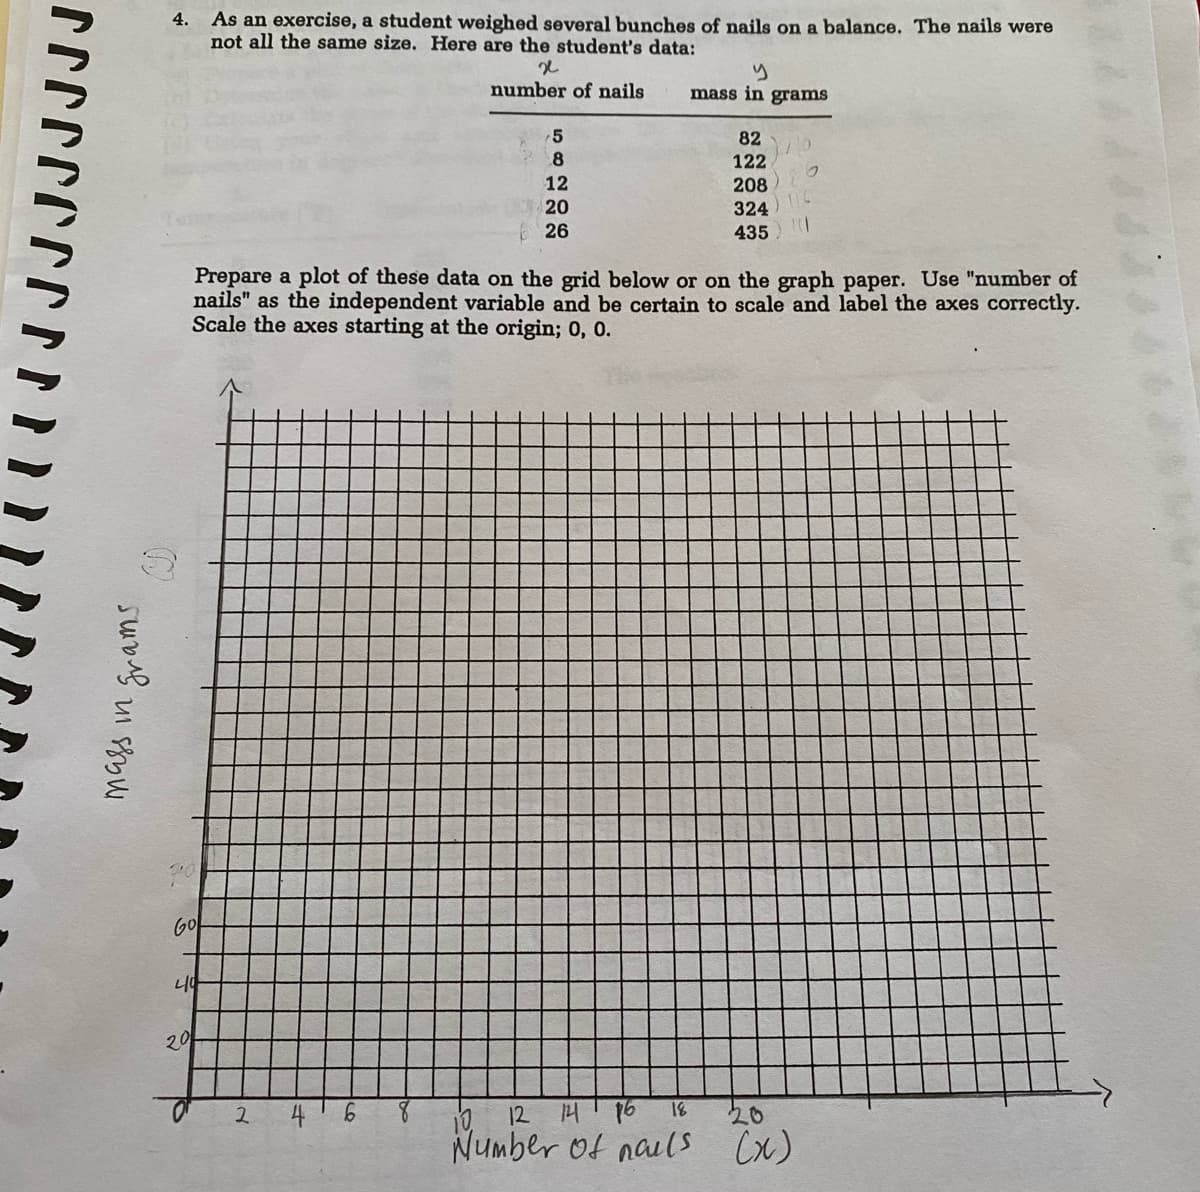 As an exercise, a student weighed several bunches of nails on a balance. The nails were
not all the same size. Here are the student's data:
4.
number of nails
mass in grams
82
122
208
324
435
12
20
26
Prepare a plot of these data on the grid below or on the graph paper. Use "number of
nails" as the independent variable and be certain to scale and label the axes correctly.
Scale the axes starting at the origin; 0, 0.
GO
20
向 12 円
Number of nails Cx)
2.
18
20
mass in
